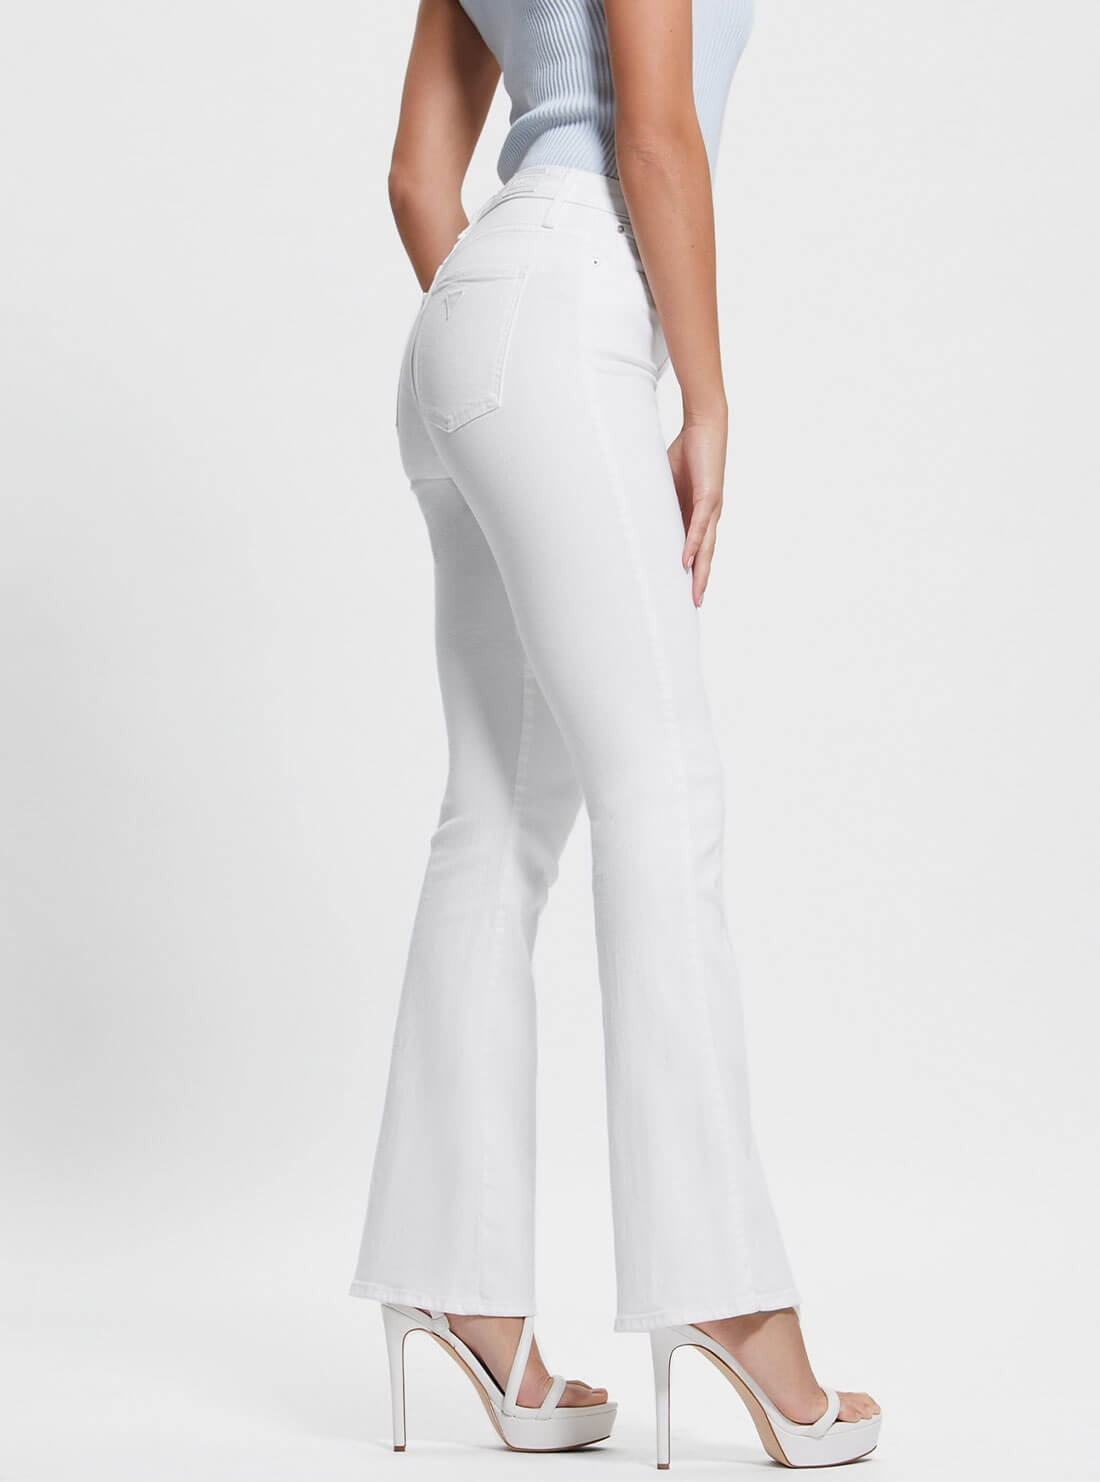  High-Rise Sexy Flare Leg Denim Jeans In Clean White Wash | GUESS Women's Denim | side view